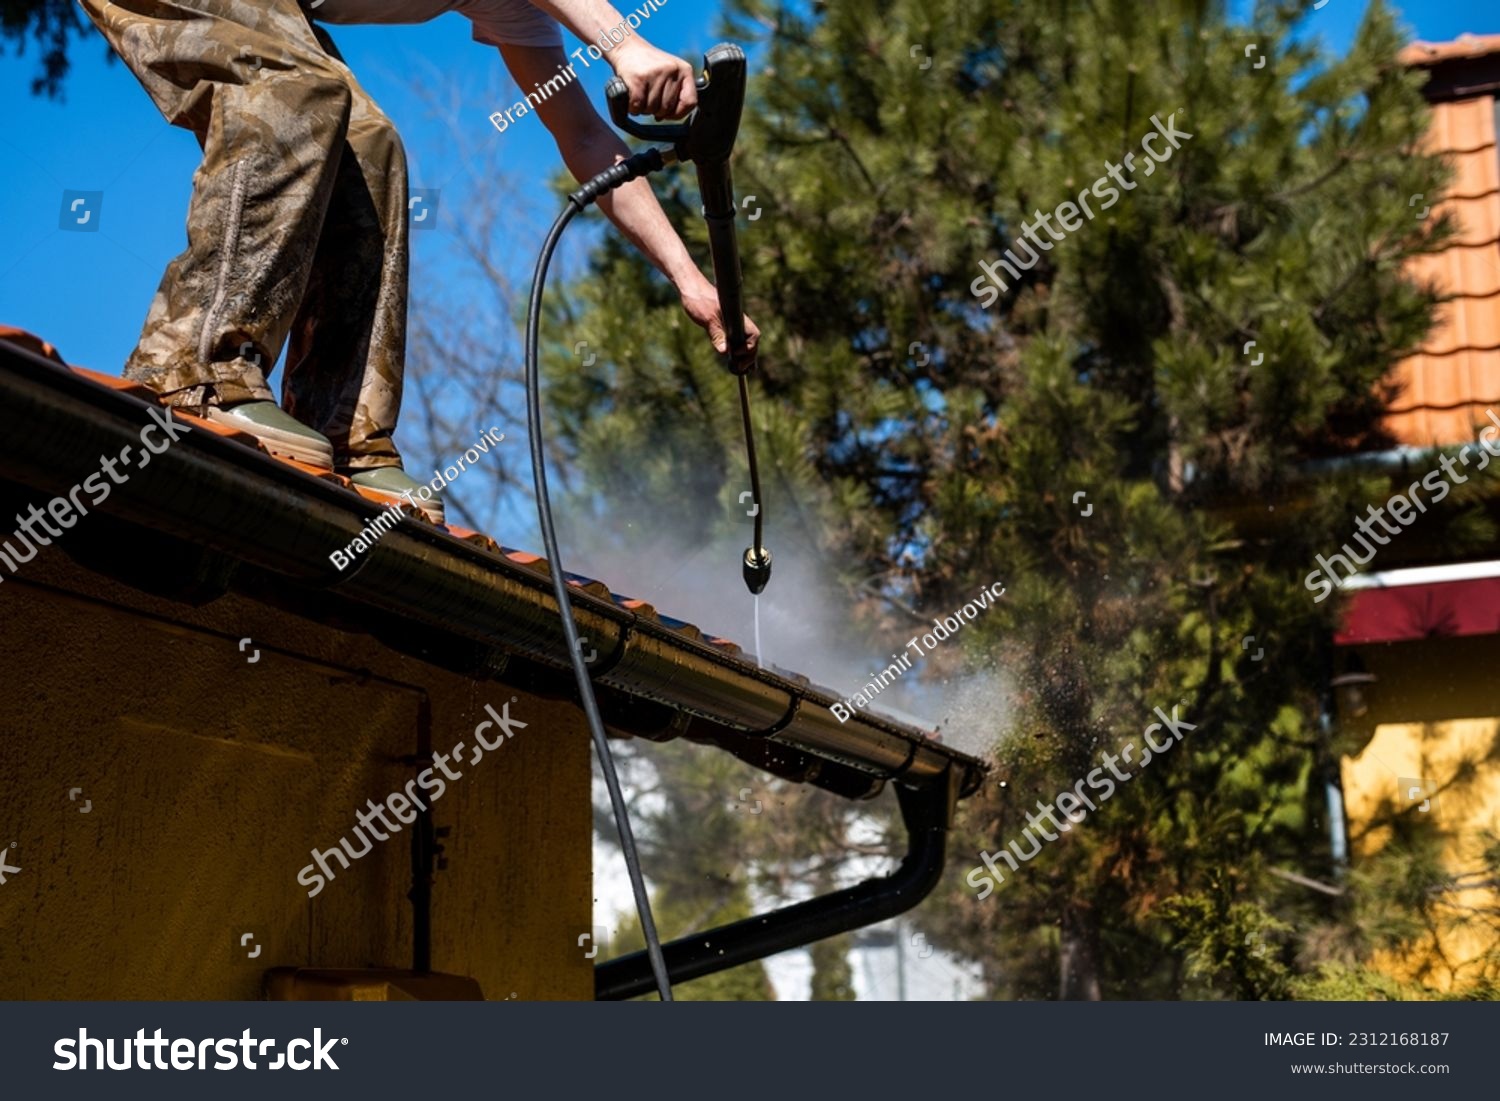 Worker standing on the roof and cleaning rain gutter with high pressure water jet. Professional with equipment for roof gutter cleaning. Maintenance and housekeeping concept of drainage channel. #2312168187